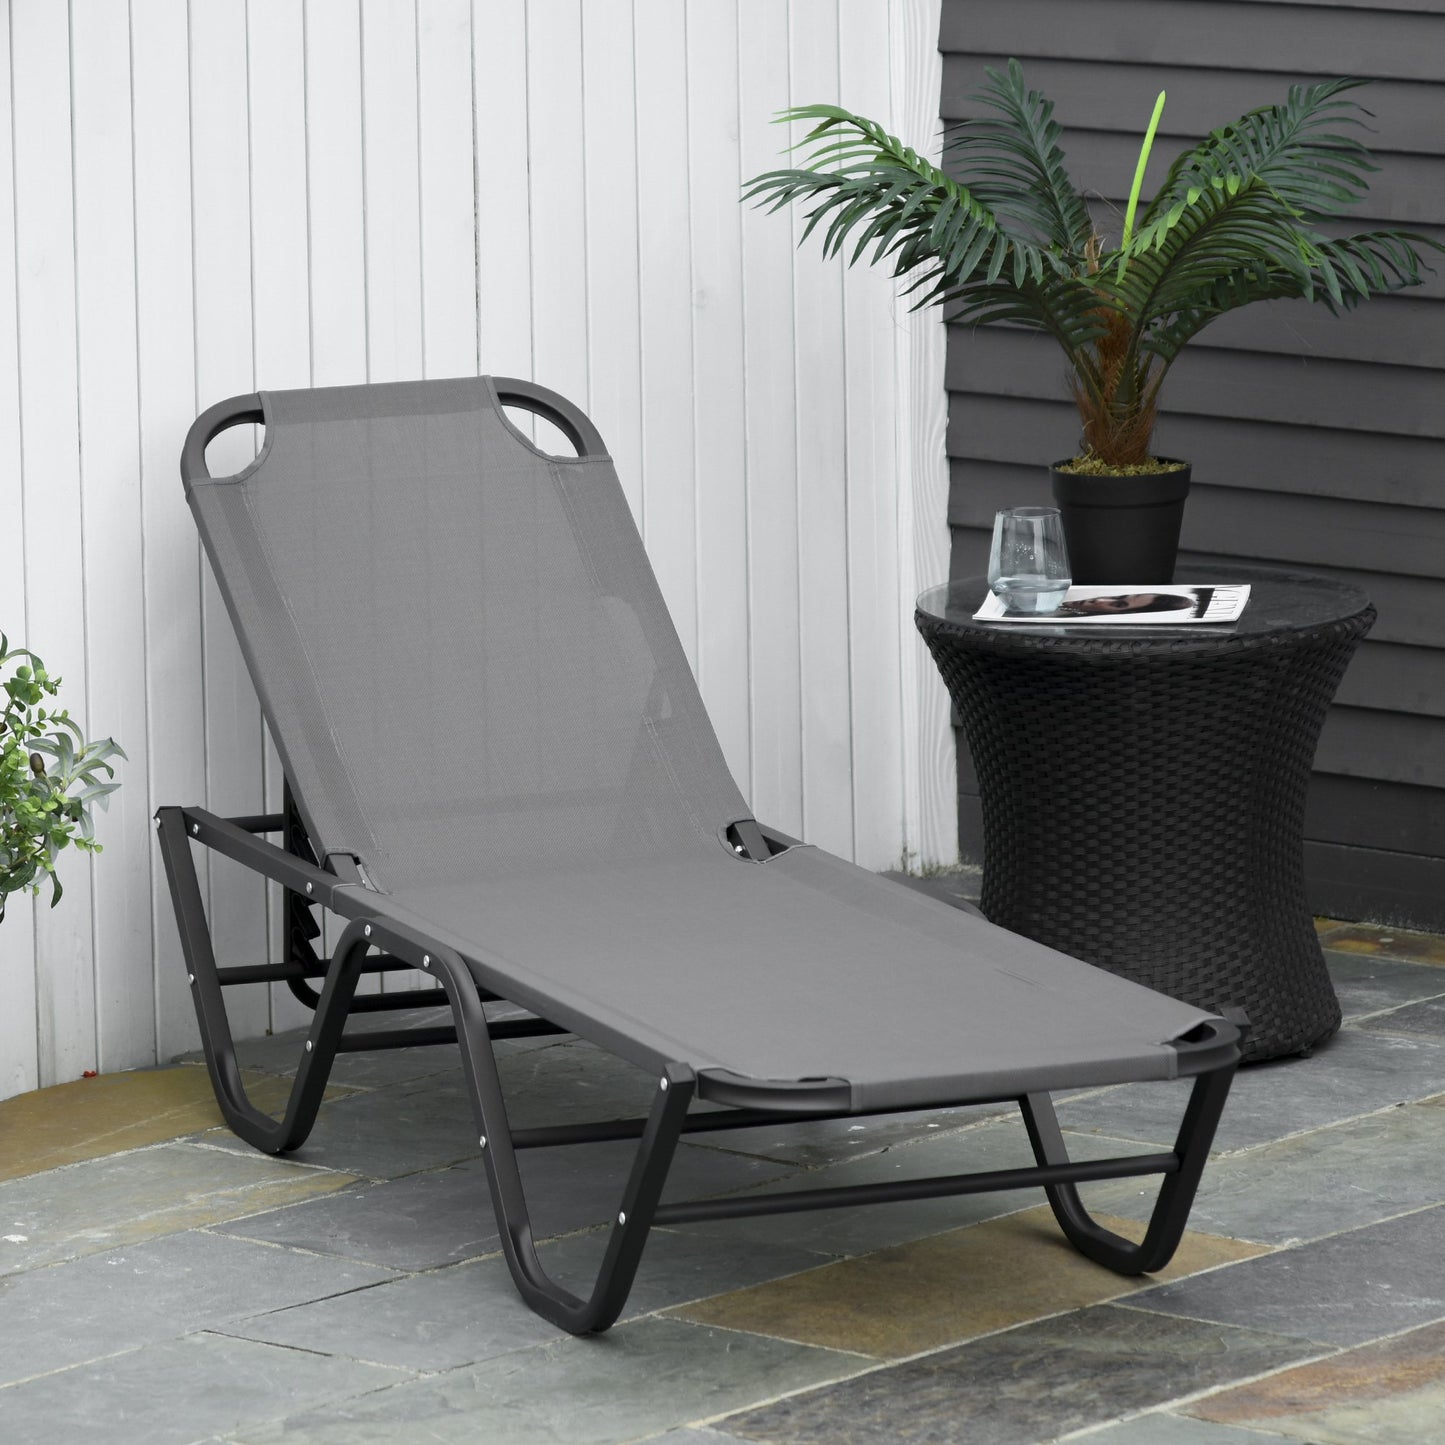 Outsunny Sun Lounger Relaxer Recliner w/ 5-Position Adjustable Backrest Pool Sun Bathing-Grey